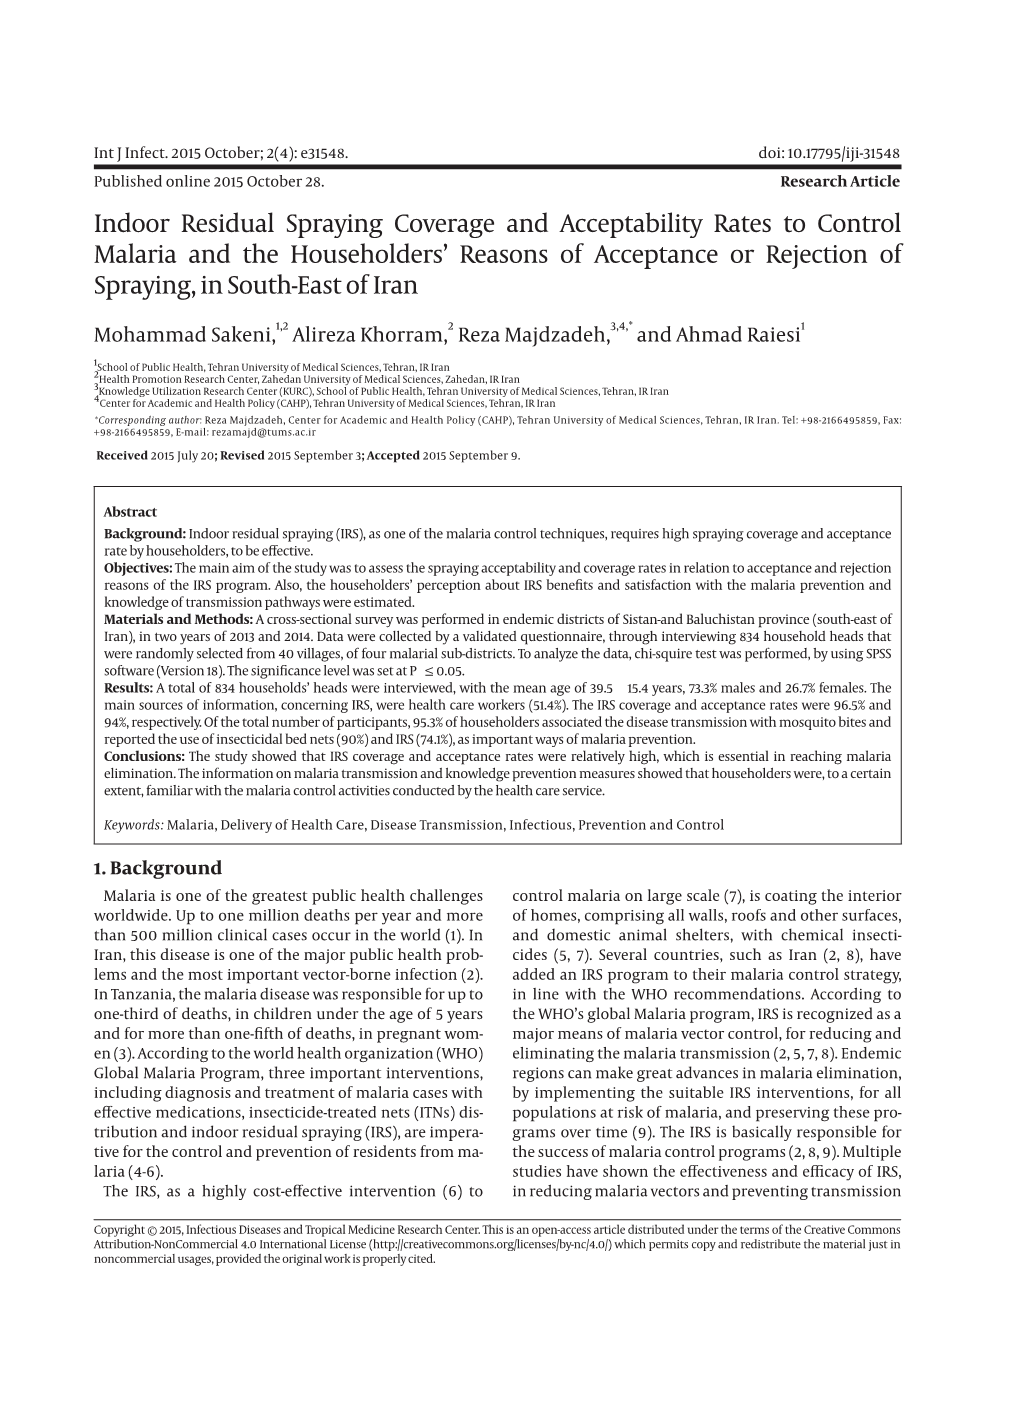 Indoor Residual Spraying Coverage and Acceptability Rates to Control